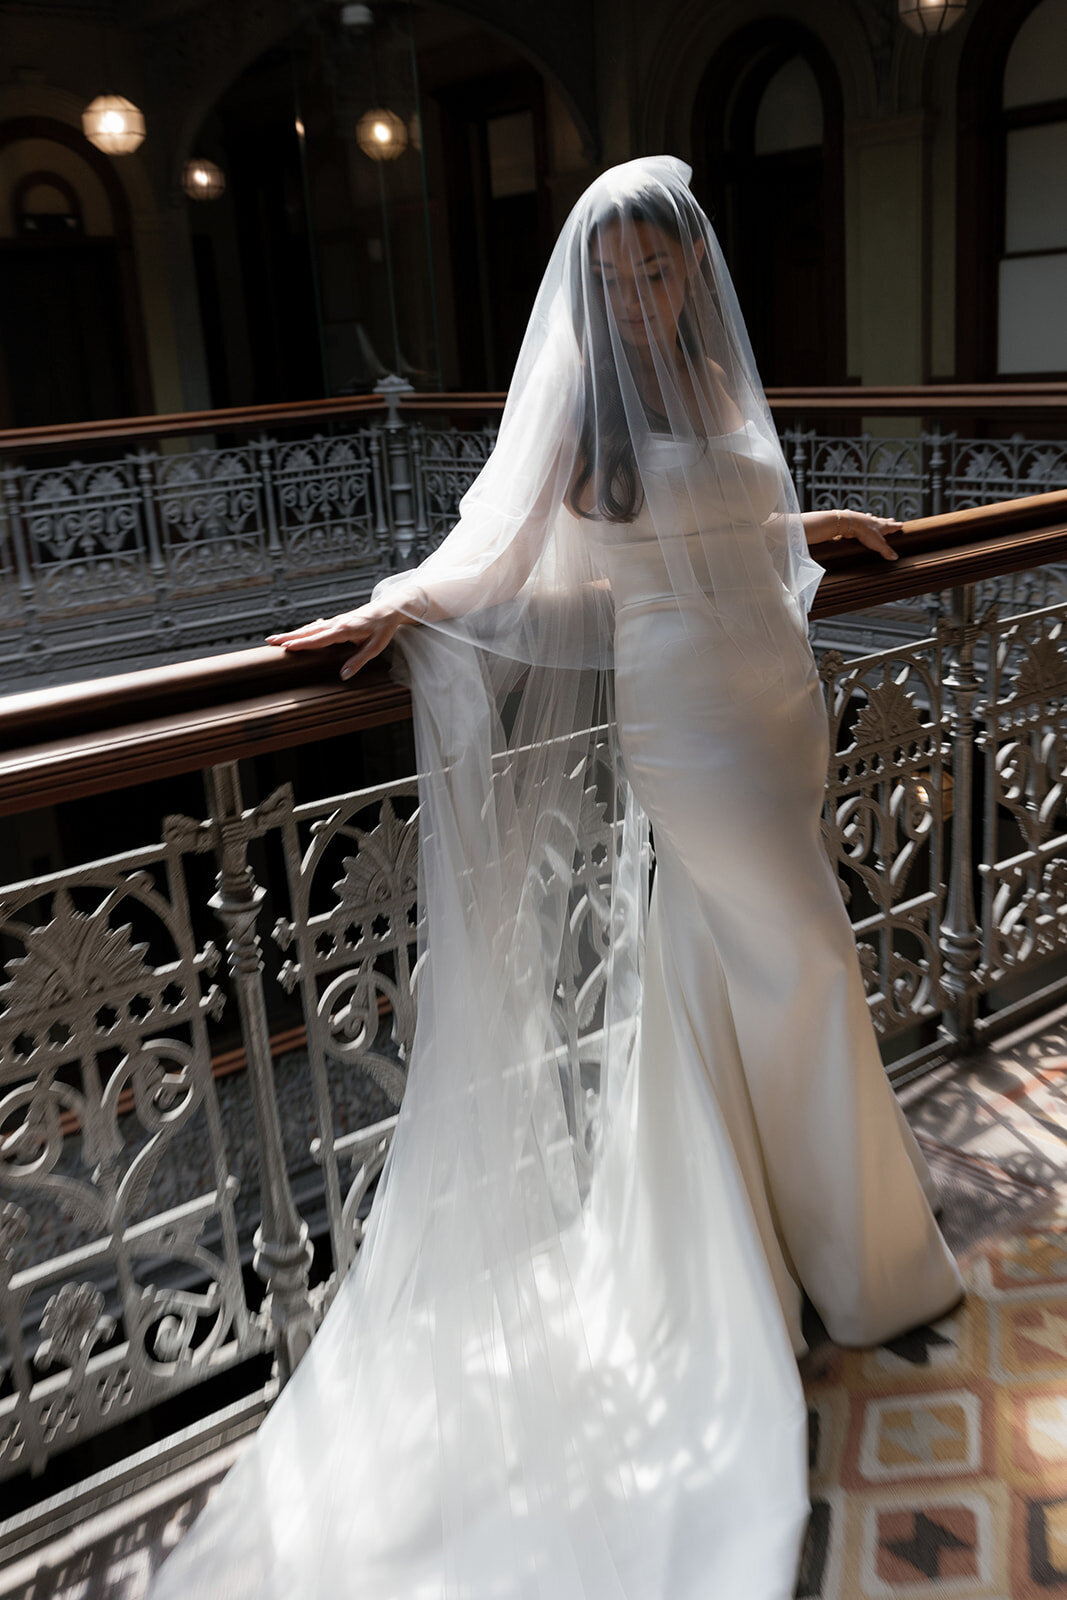 Bride posing for photoshoot in a white dress with staircase